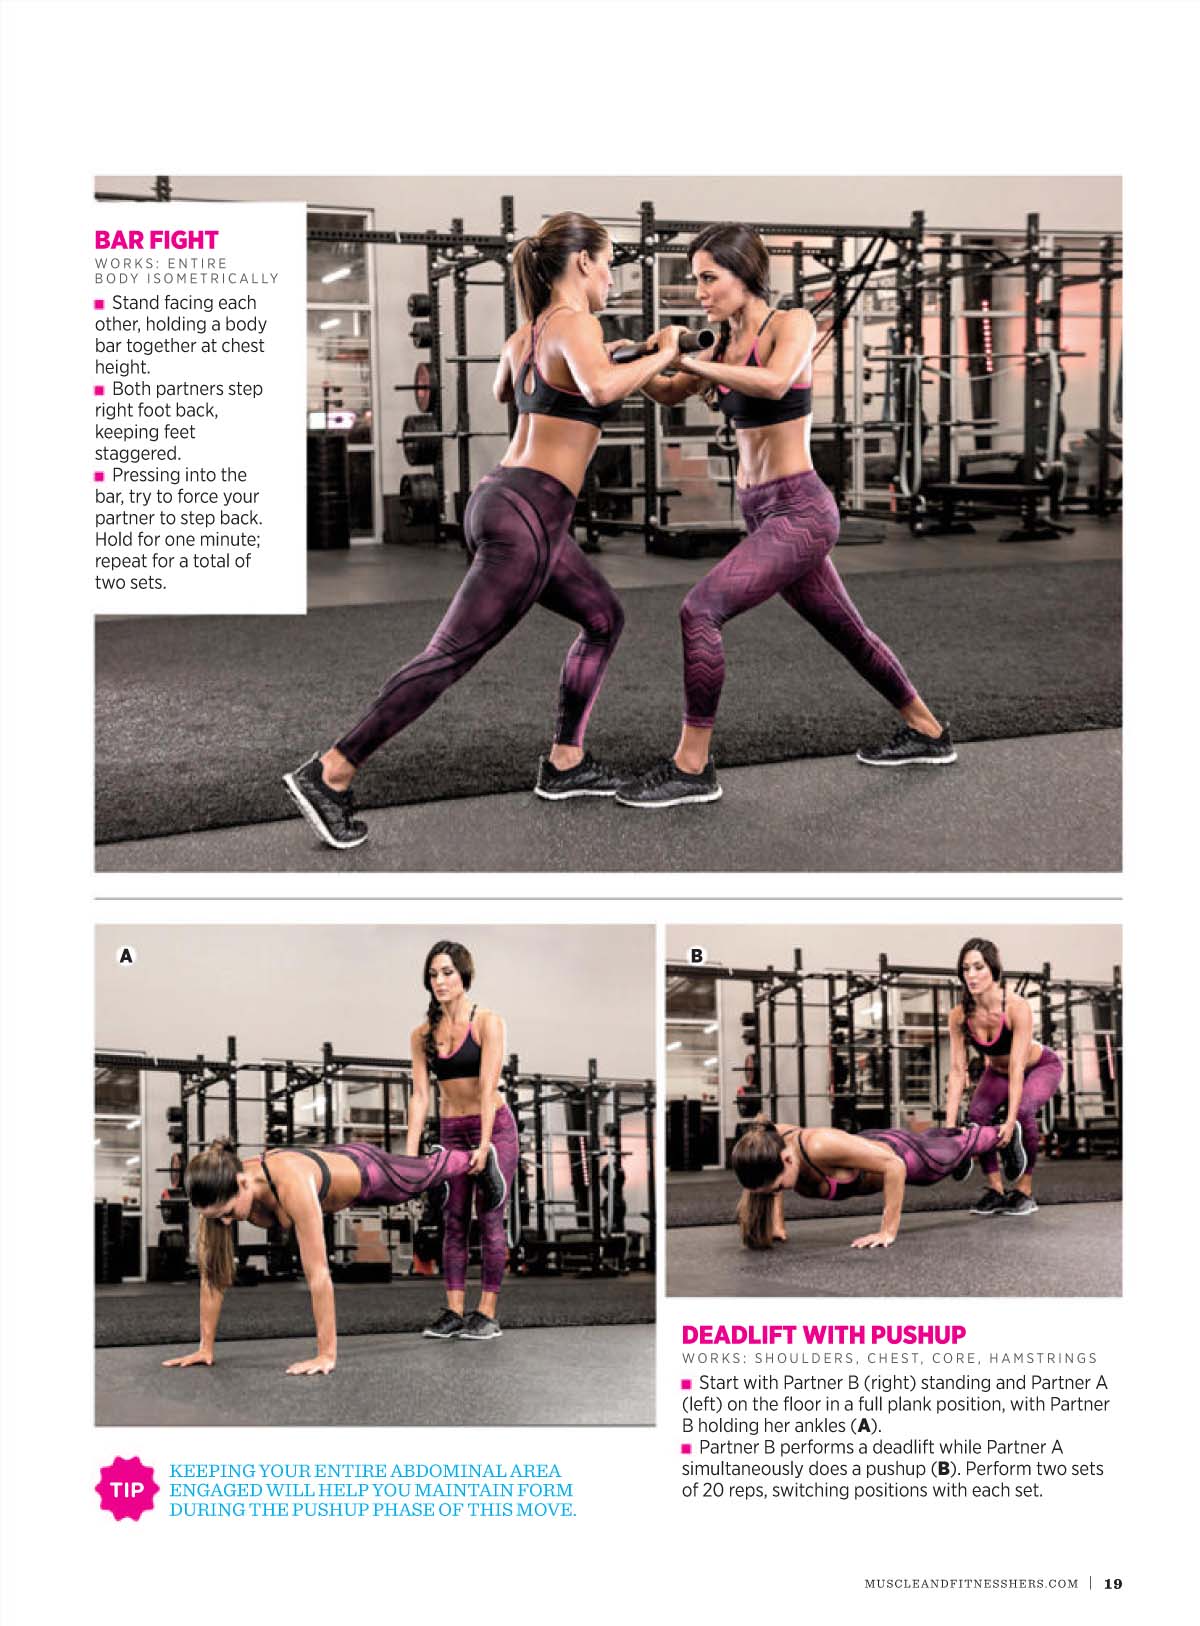 Bella Twins 9-page spread on Muscle & Fitness Hers magazine – Wrestling-Online.com